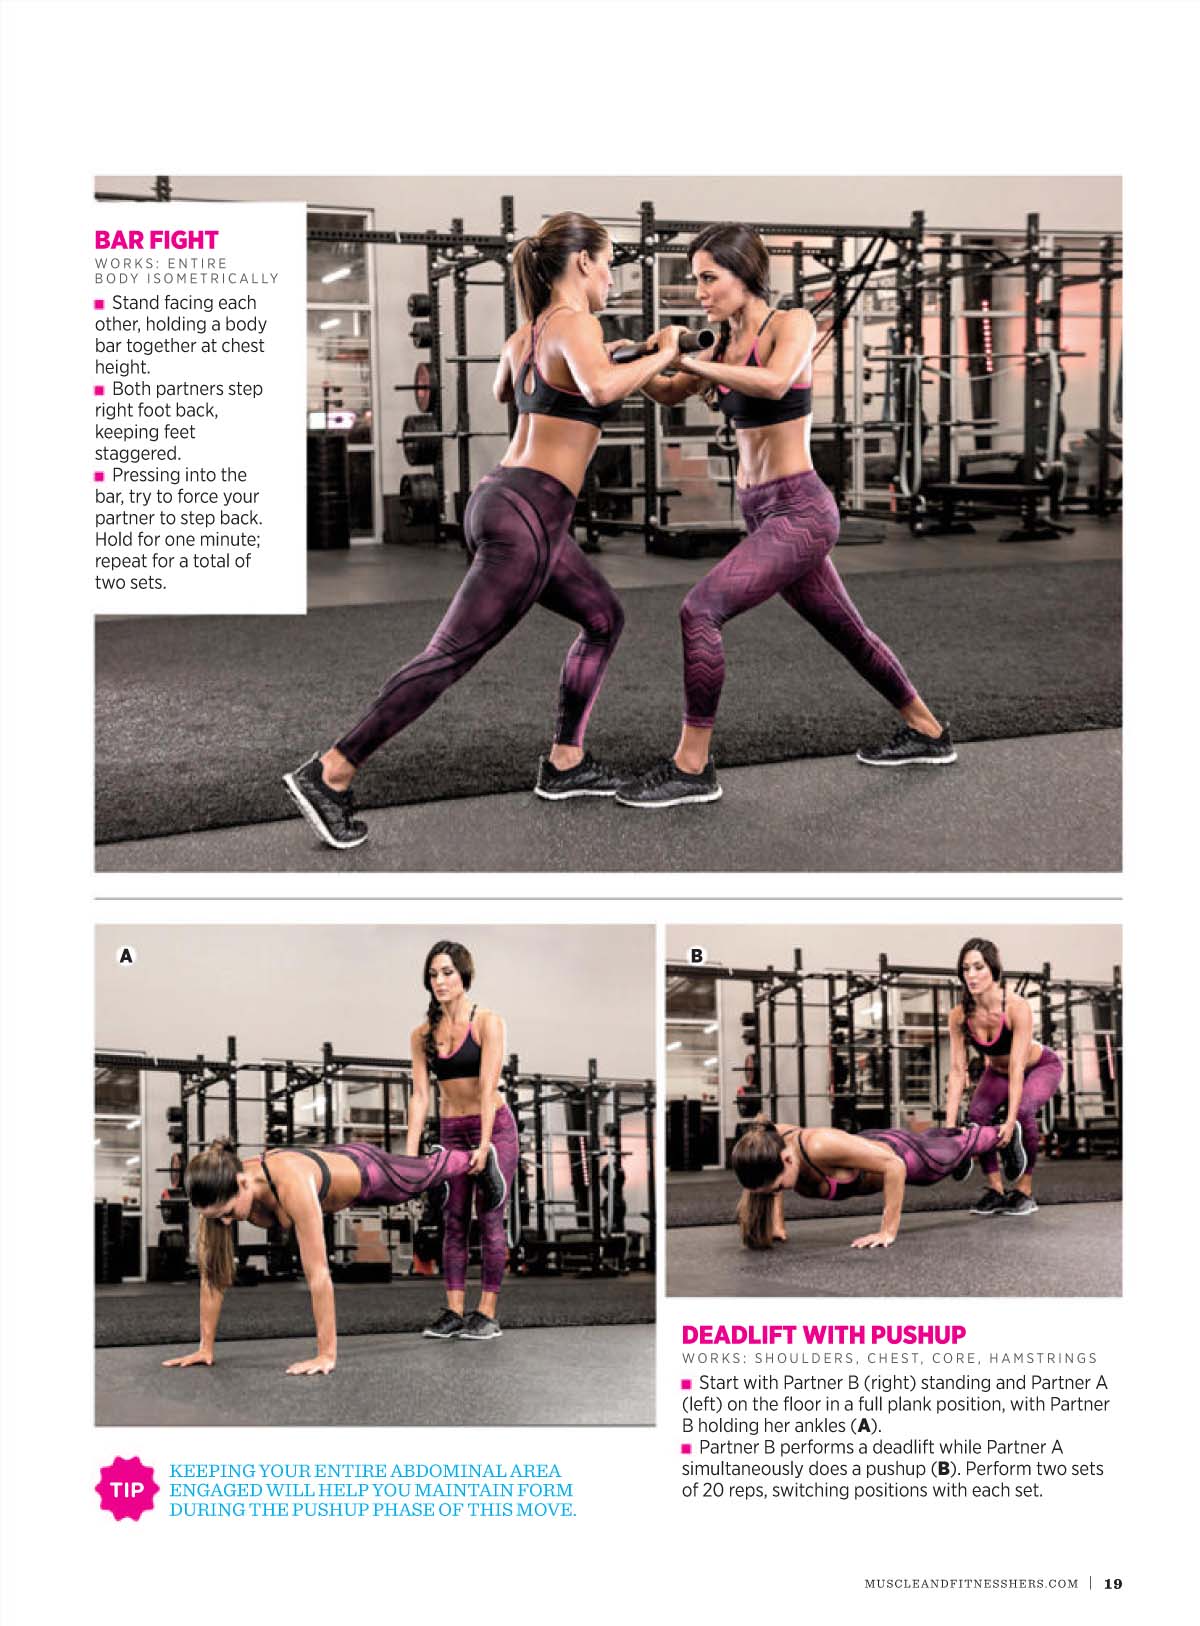 Bella Twins 9-page spread on Muscle & Fitness Hers magazine – Wrestling-Online.com